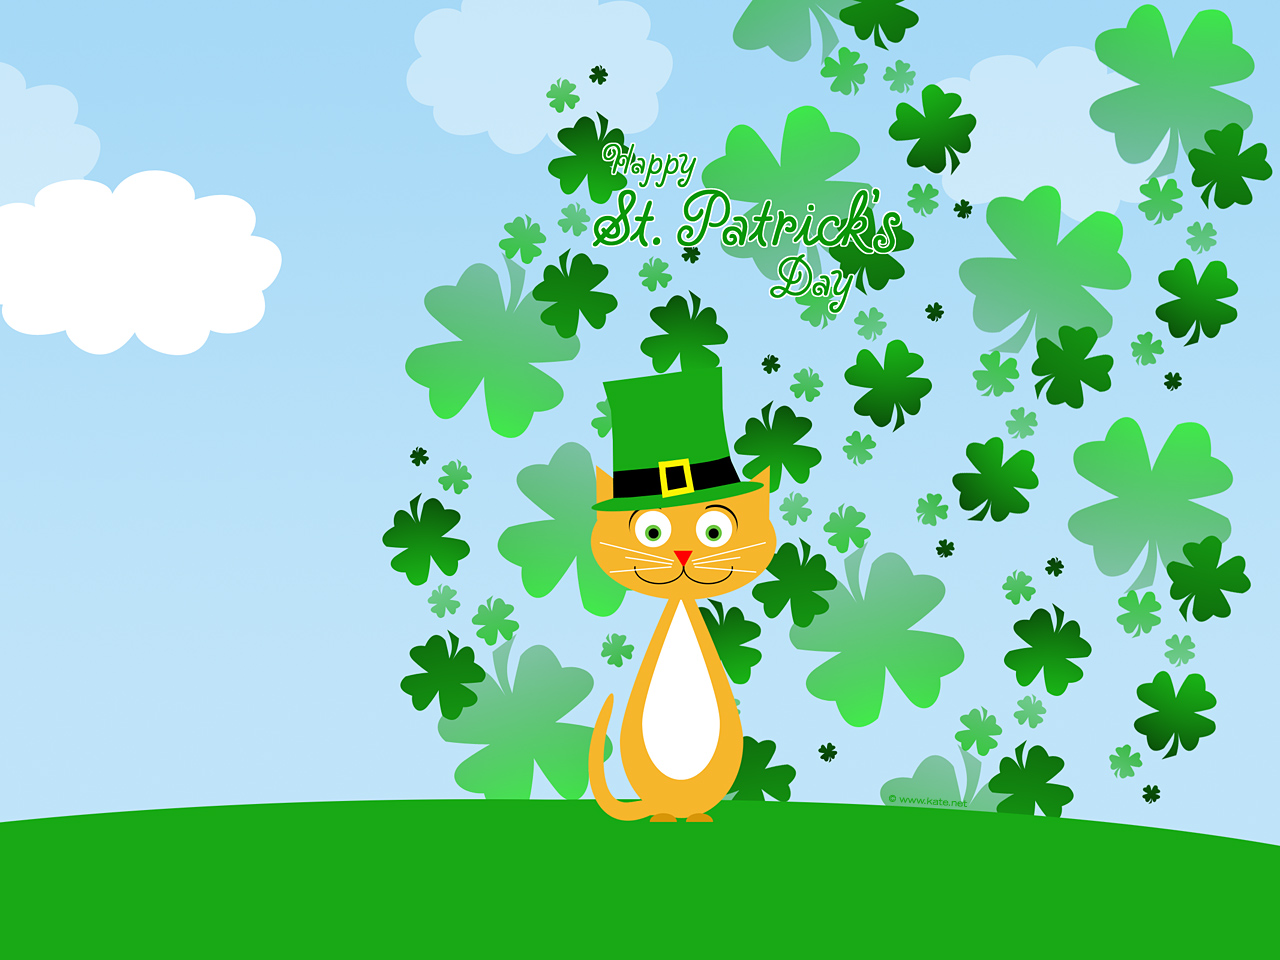 St Patrick's Day Background Images, HD Pictures and Wallpaper For